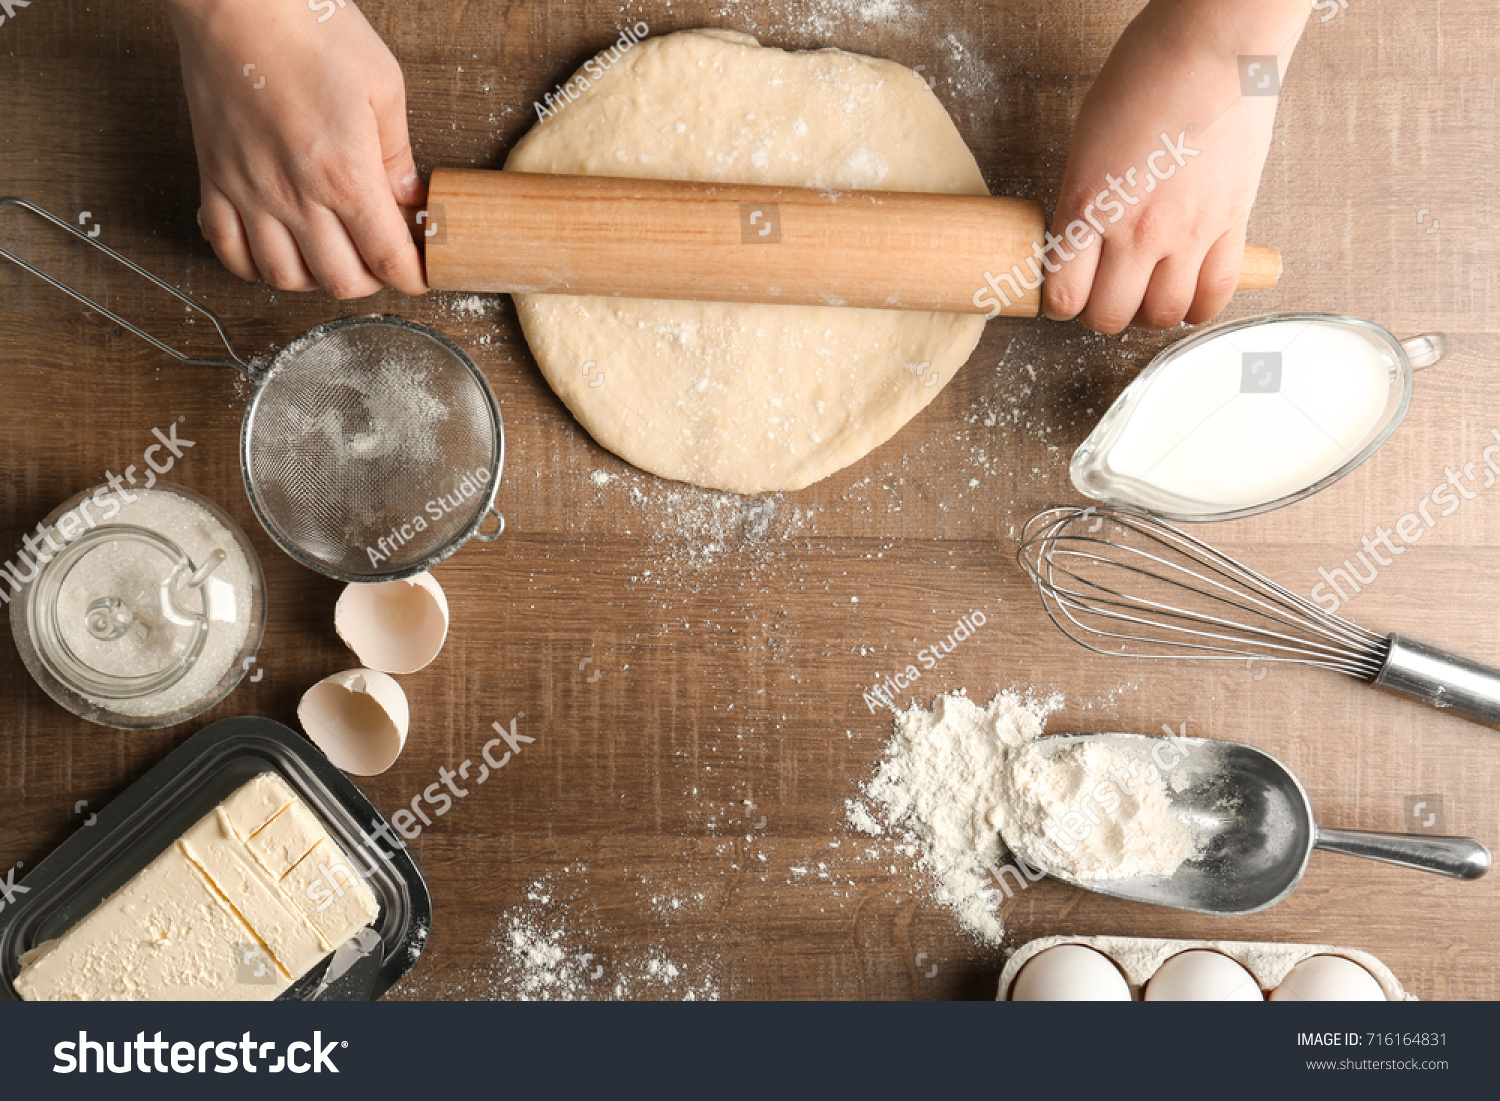 Woman Rolling Dough On Kitchen Table Stock Photo Edit Now 716164831